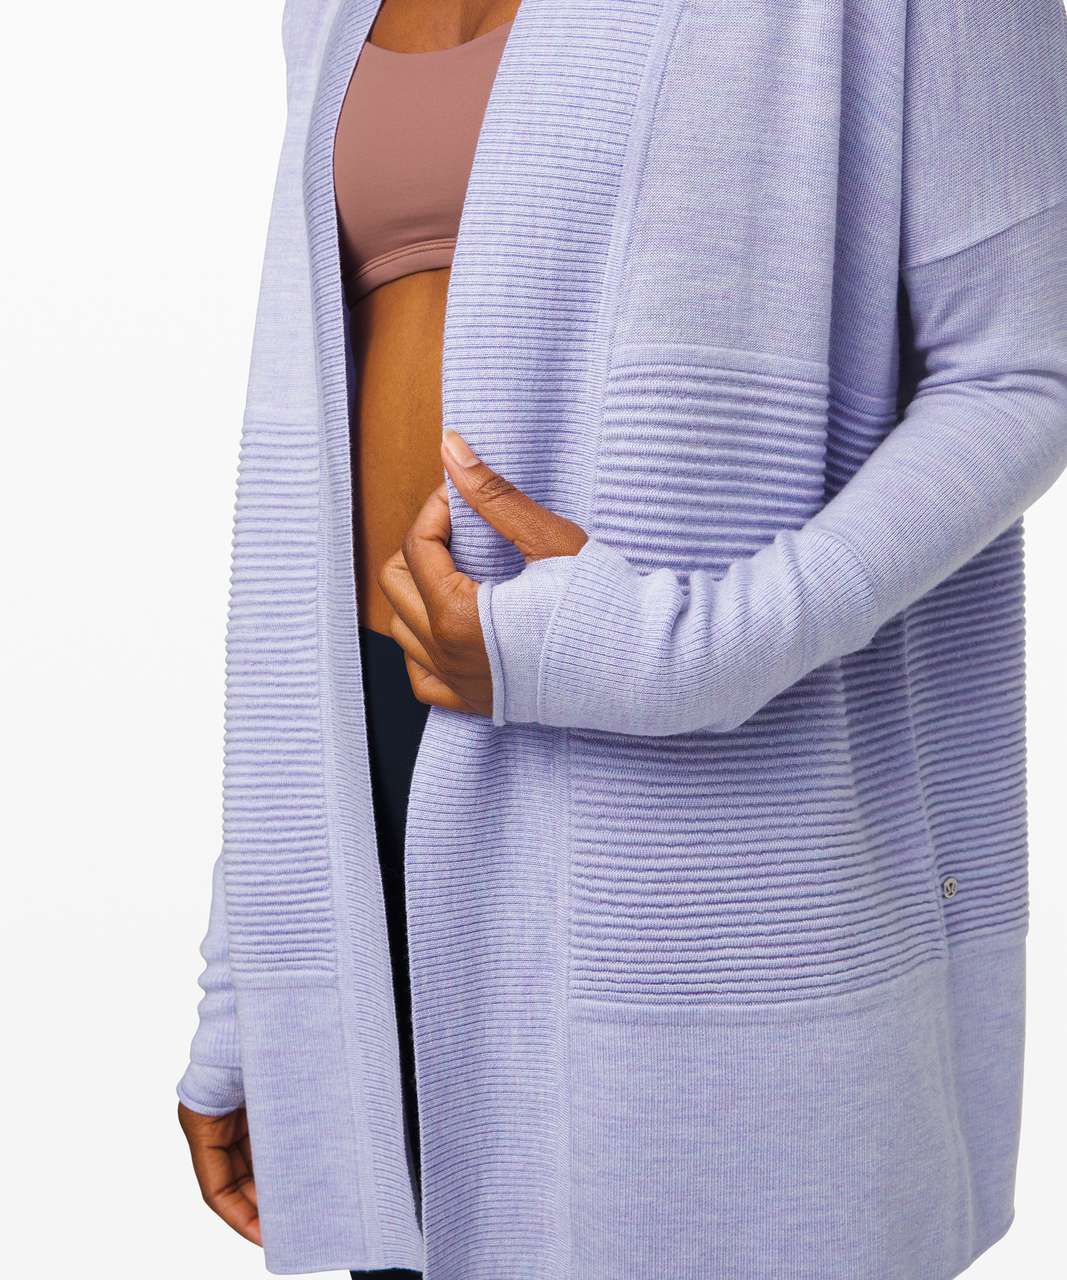 Lululemon Store Photos Forever Warm Pullover, Sit In Lotus Wrap